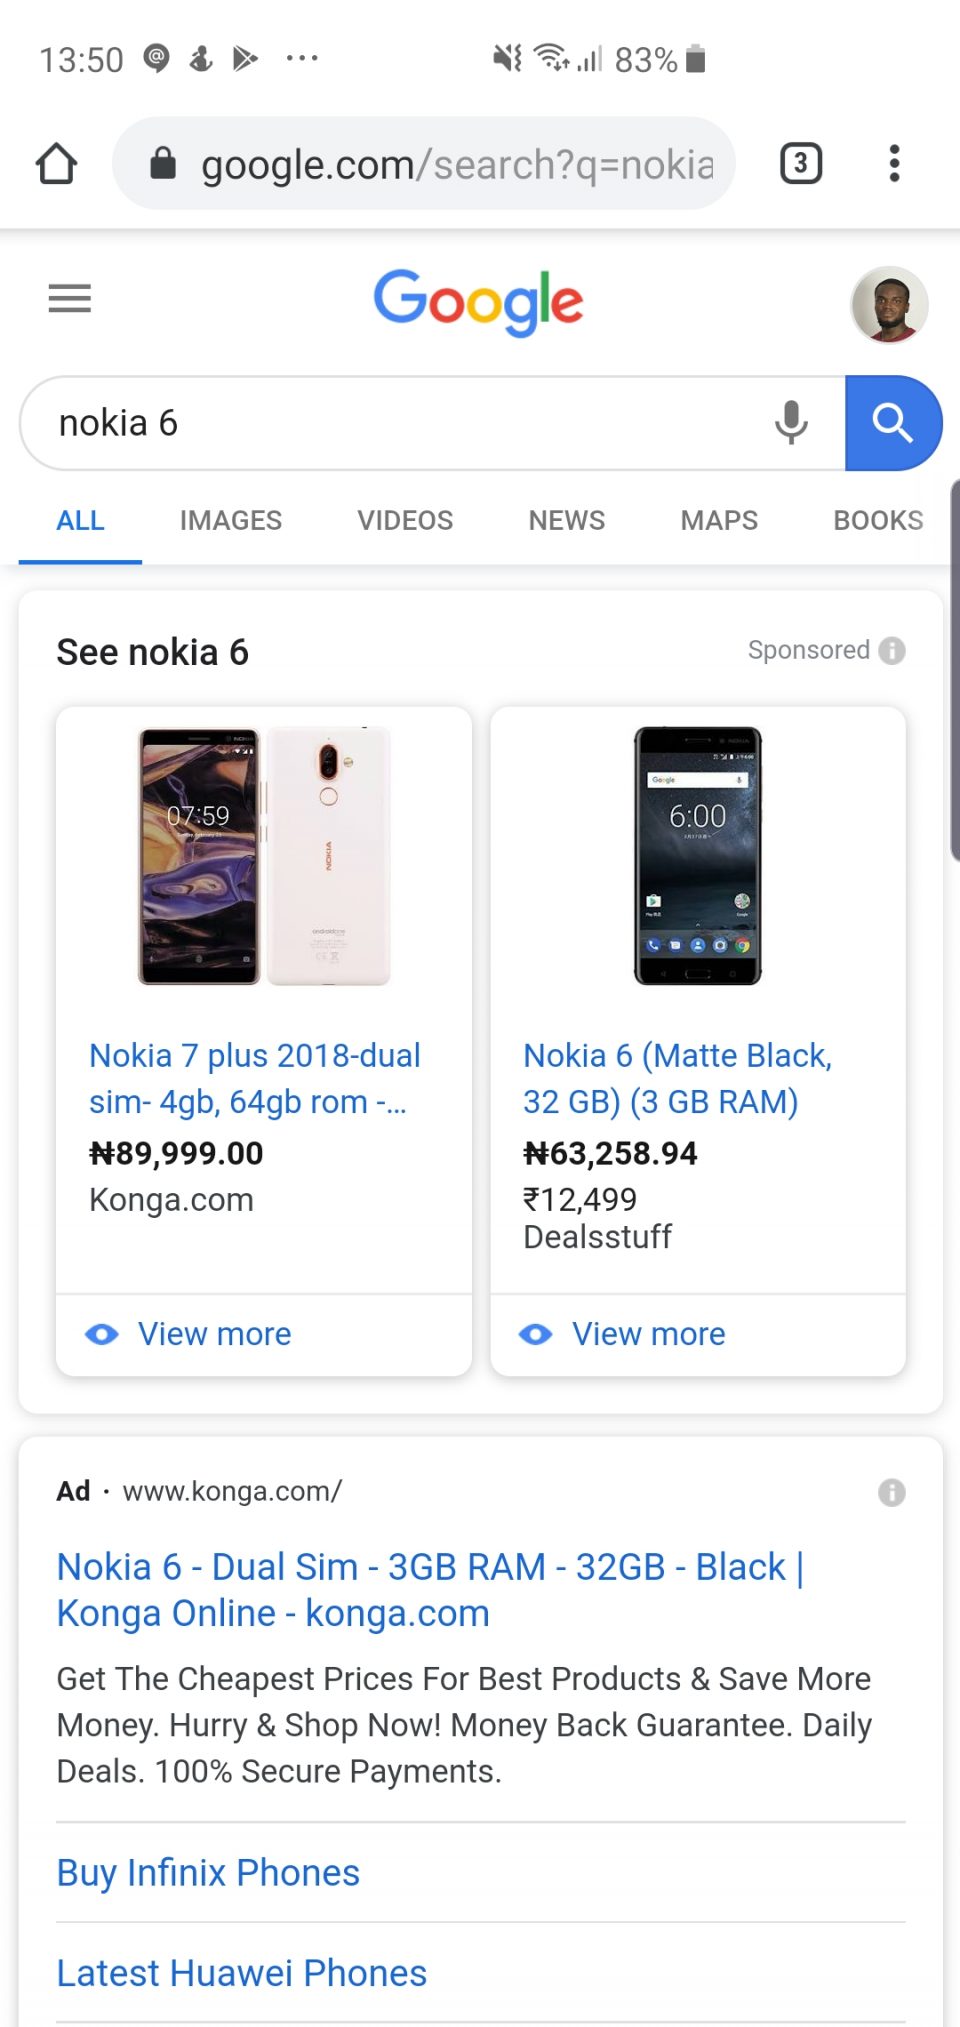 Shopping ads are coming to Nigeria